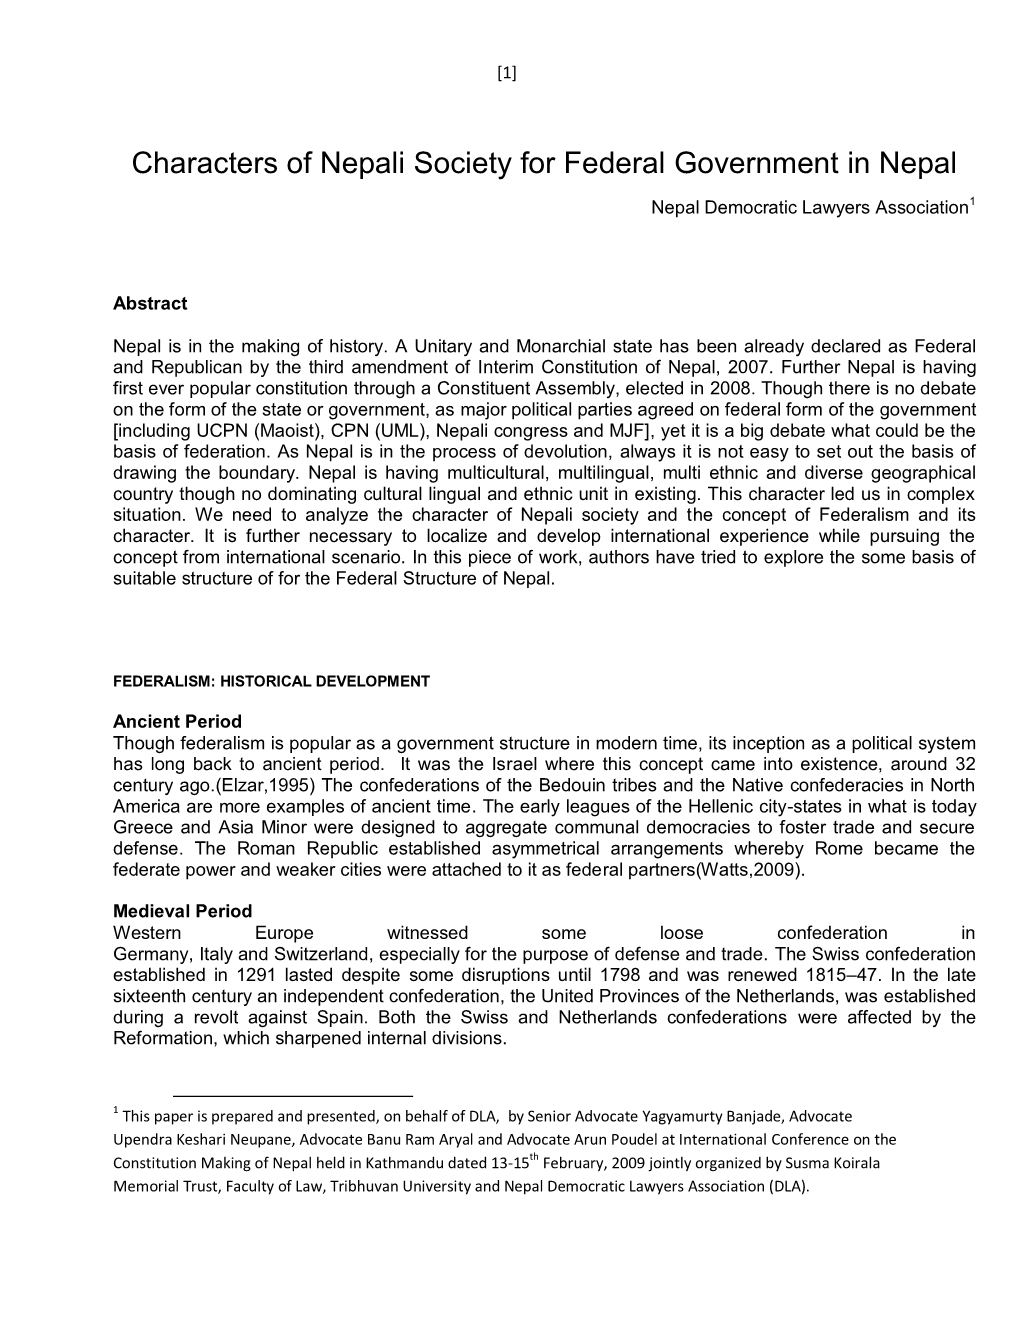 Characters of Nepali Society for Federal Government in Nepal